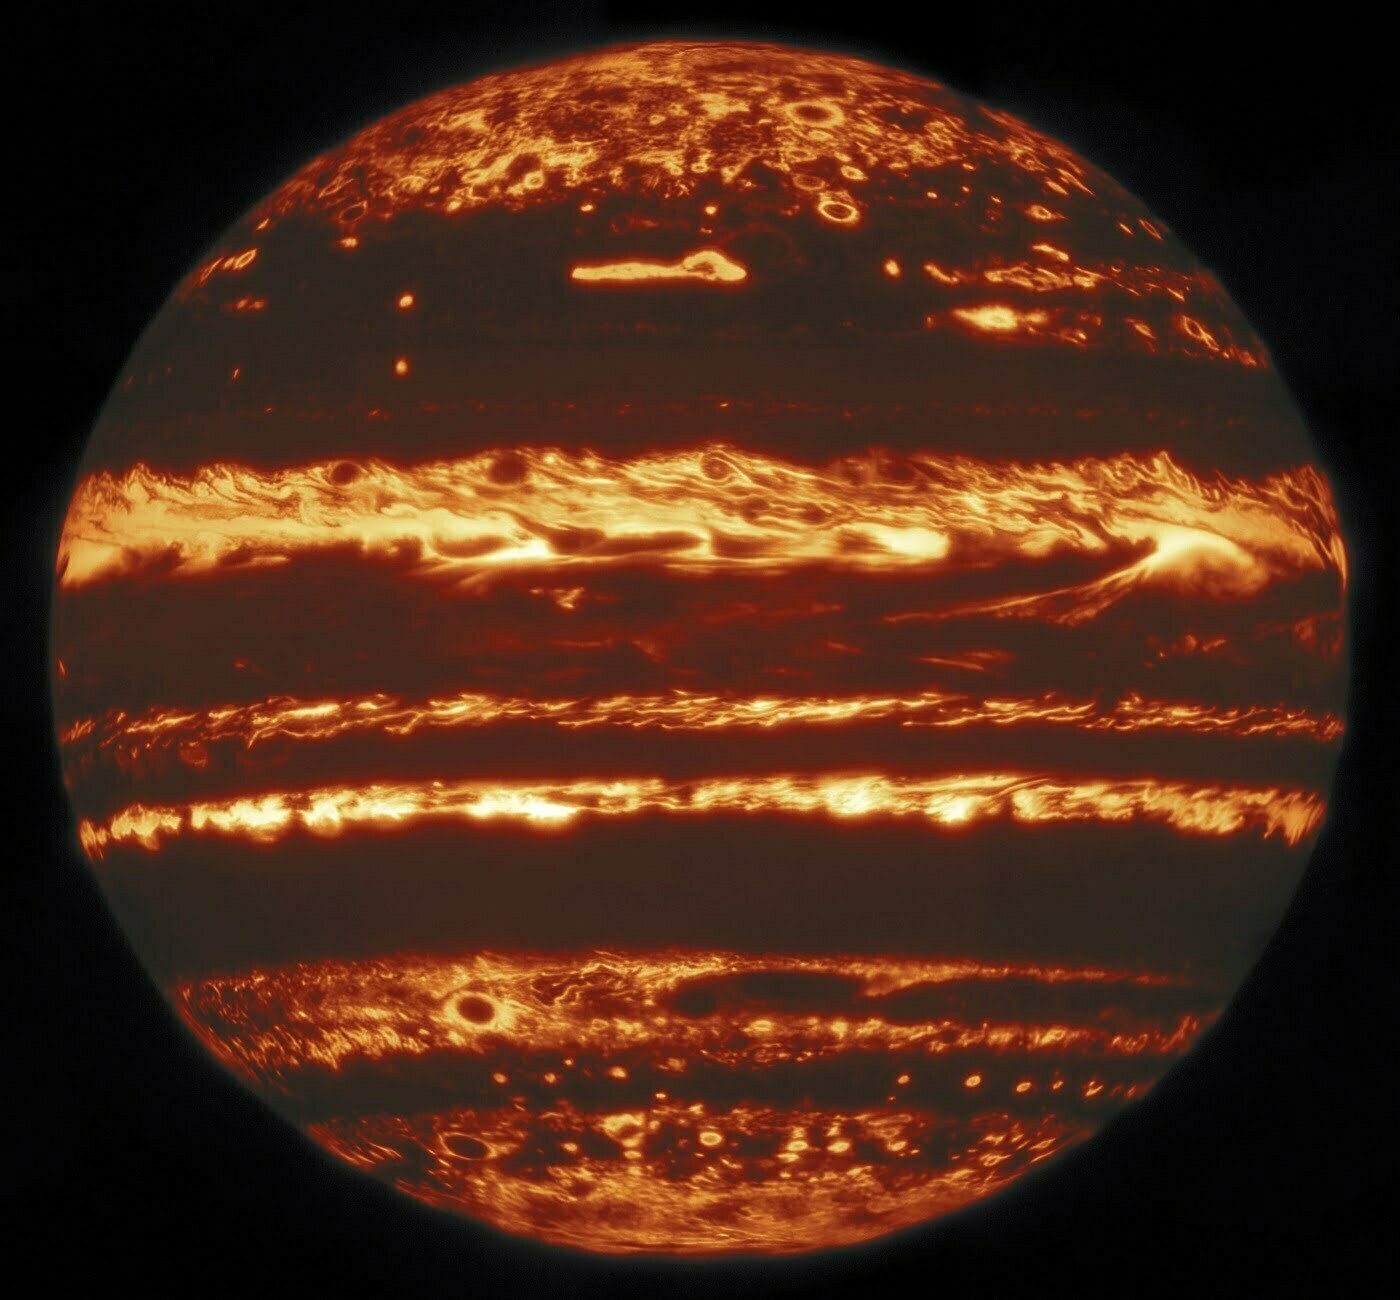 Jupiter seen with Gemini’s Lucky